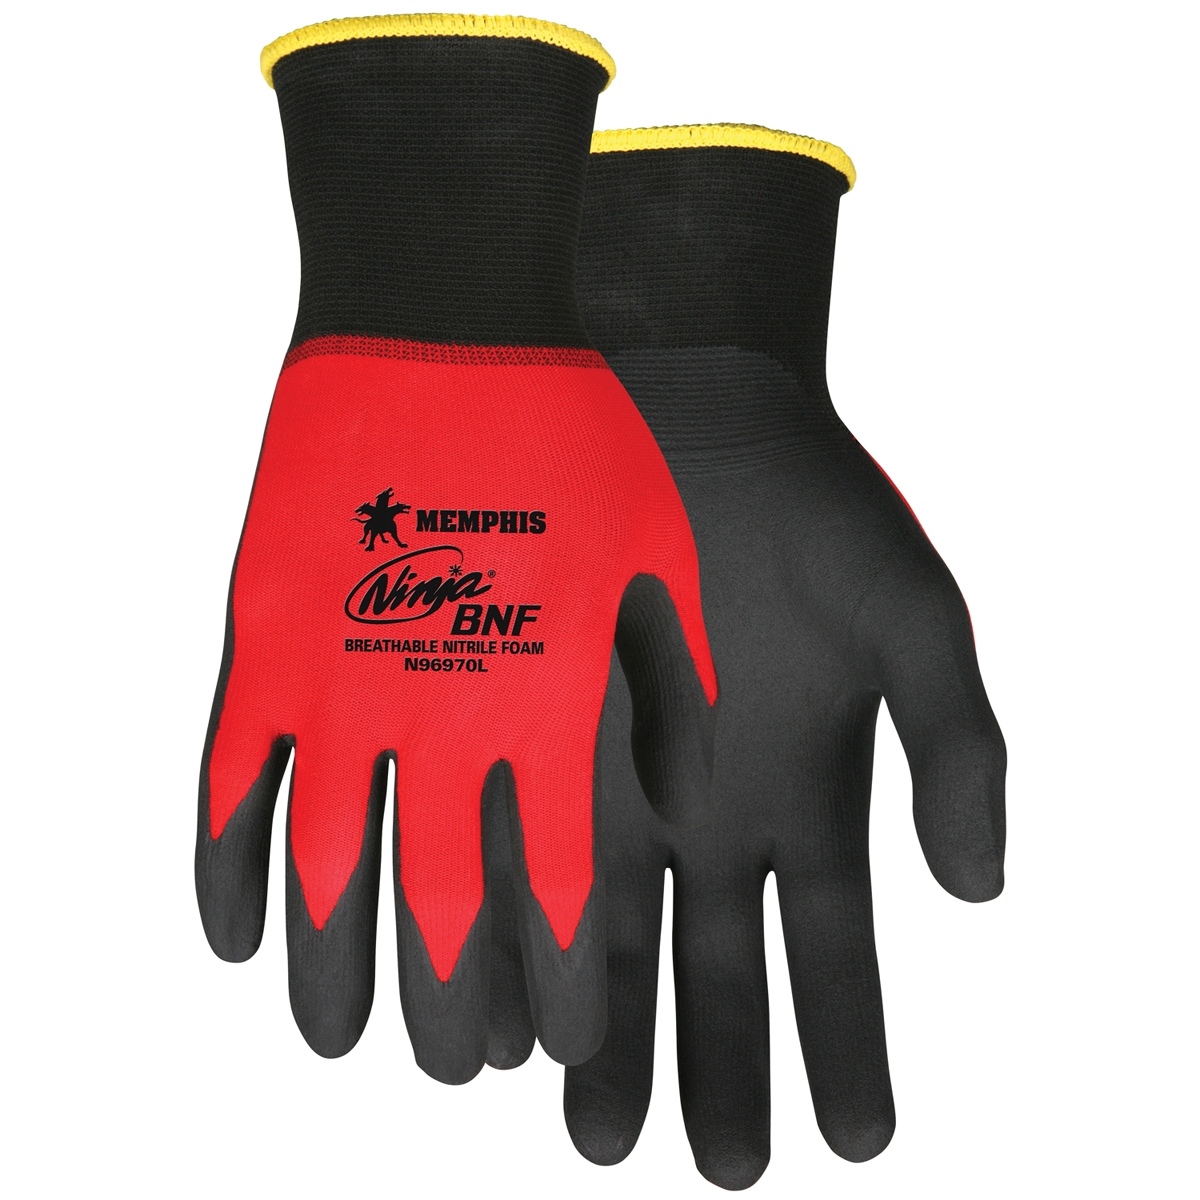 N96970 - MCR Safety Memphis Ninja® BNF, 18 Gauge Red Nylon/Spandex Shell, Black Coated Palm and Fingertips 